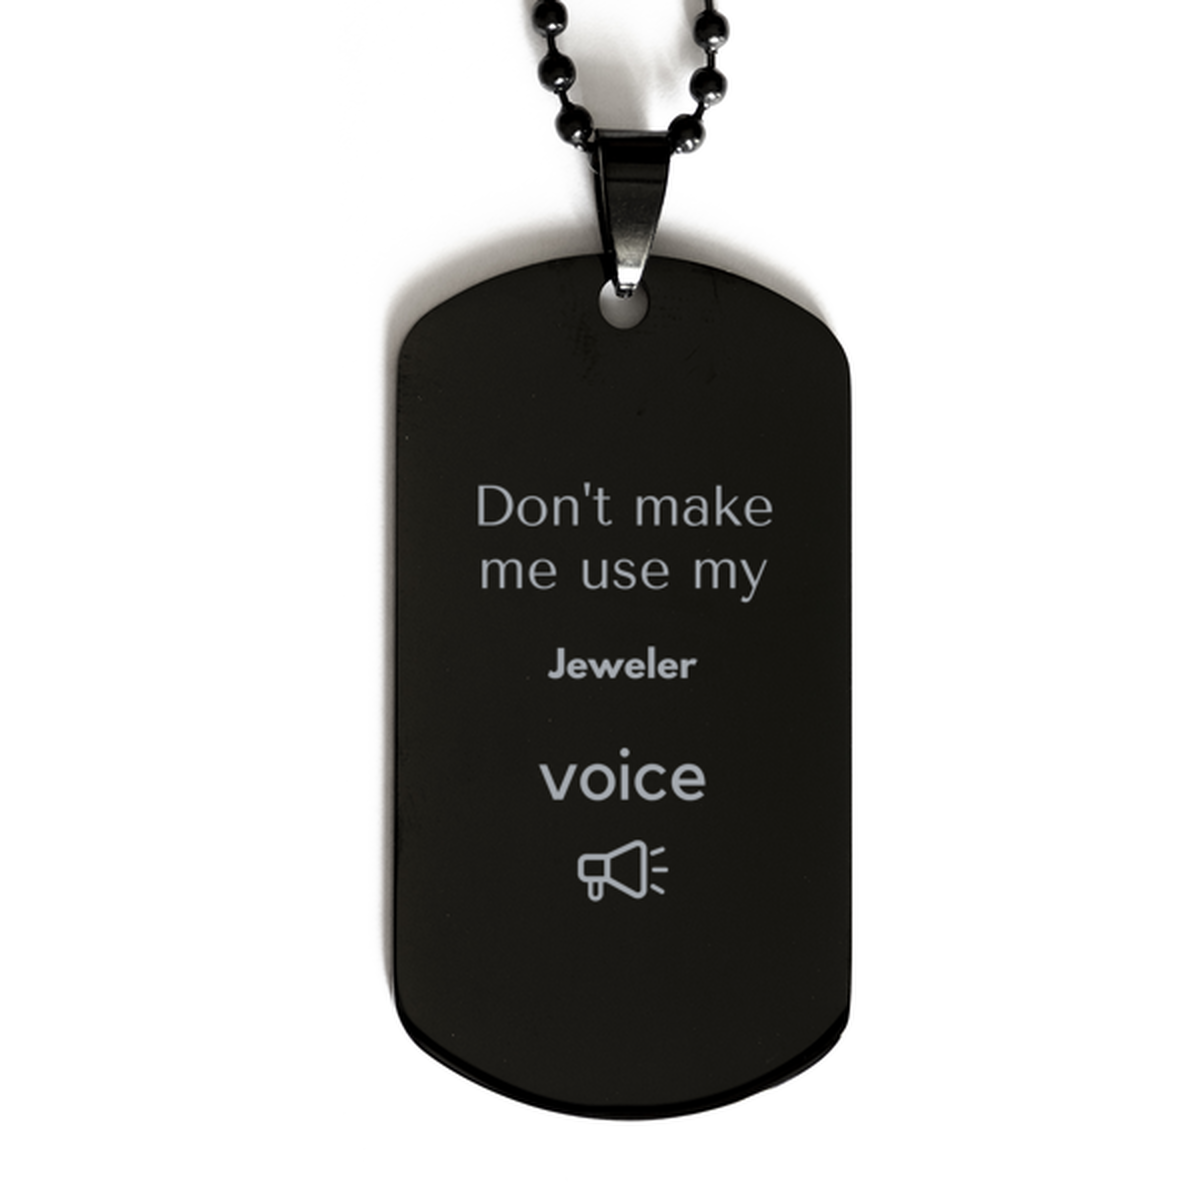 Don't make me use my Jeweler voice, Sarcasm Jeweler Gifts, Christmas Jeweler Black Dog Tag Birthday Unique Gifts For Jeweler Coworkers, Men, Women, Colleague, Friends